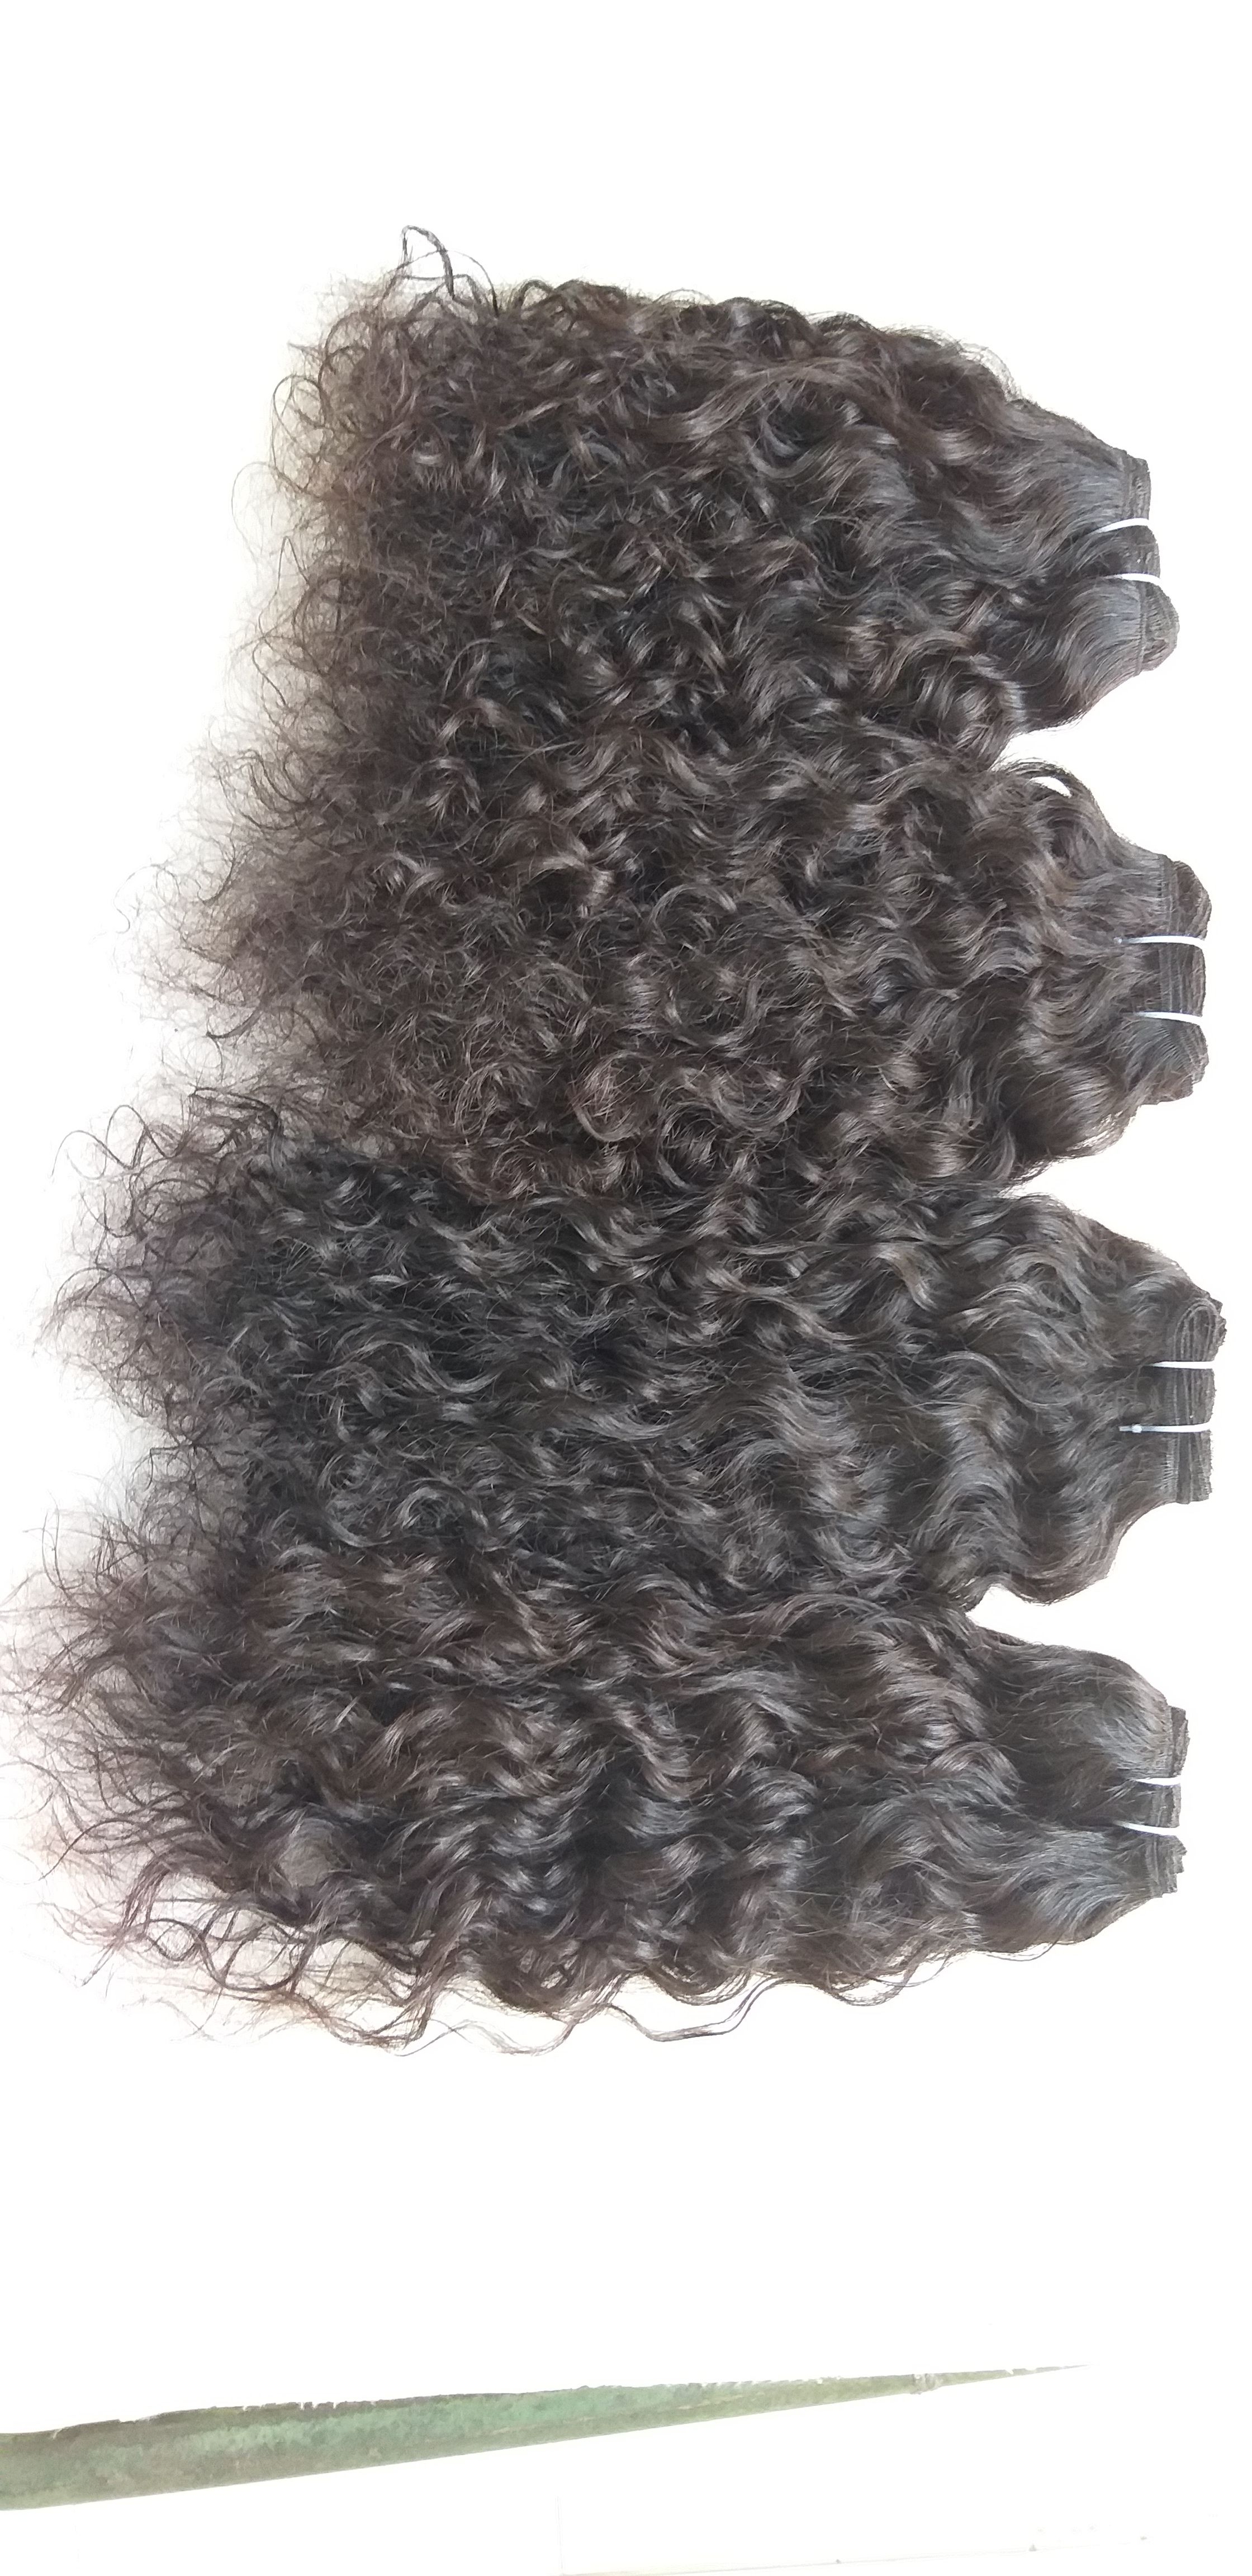 Raw Deep Curly Long Lasting Hair Extensions